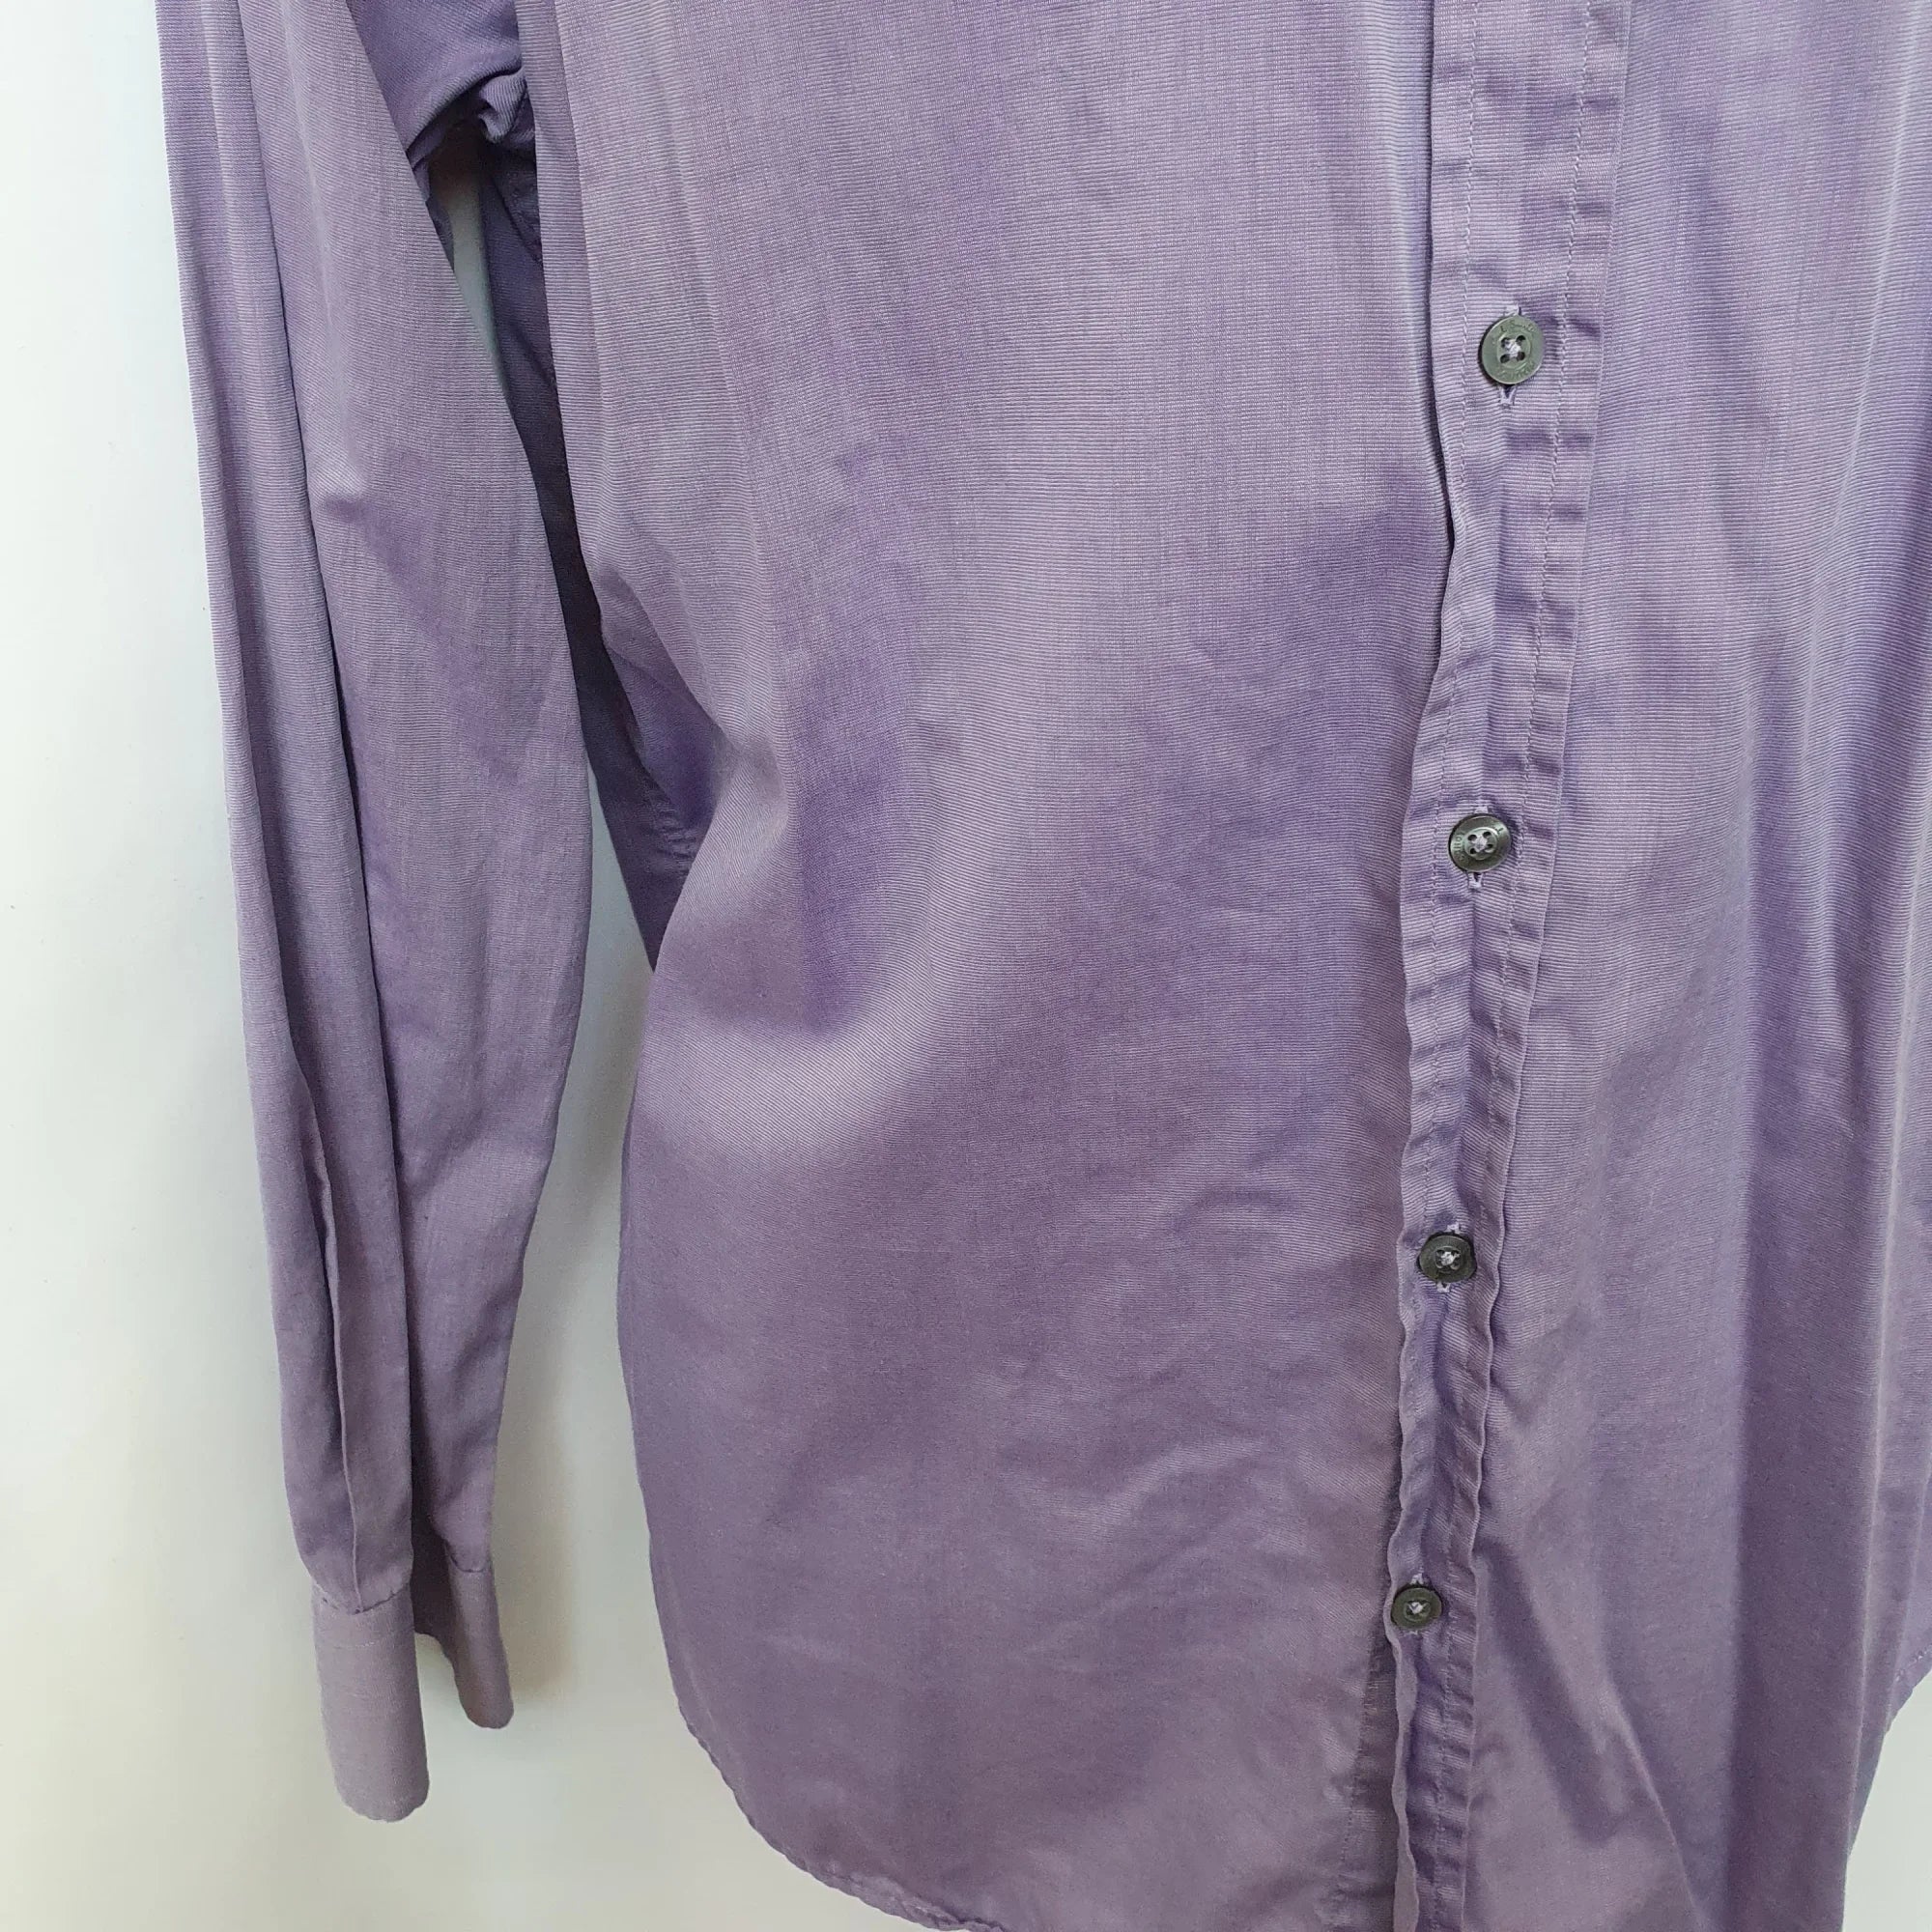 Paul Smith Mens Purple Shirt Branded Buttons 17’ Collar